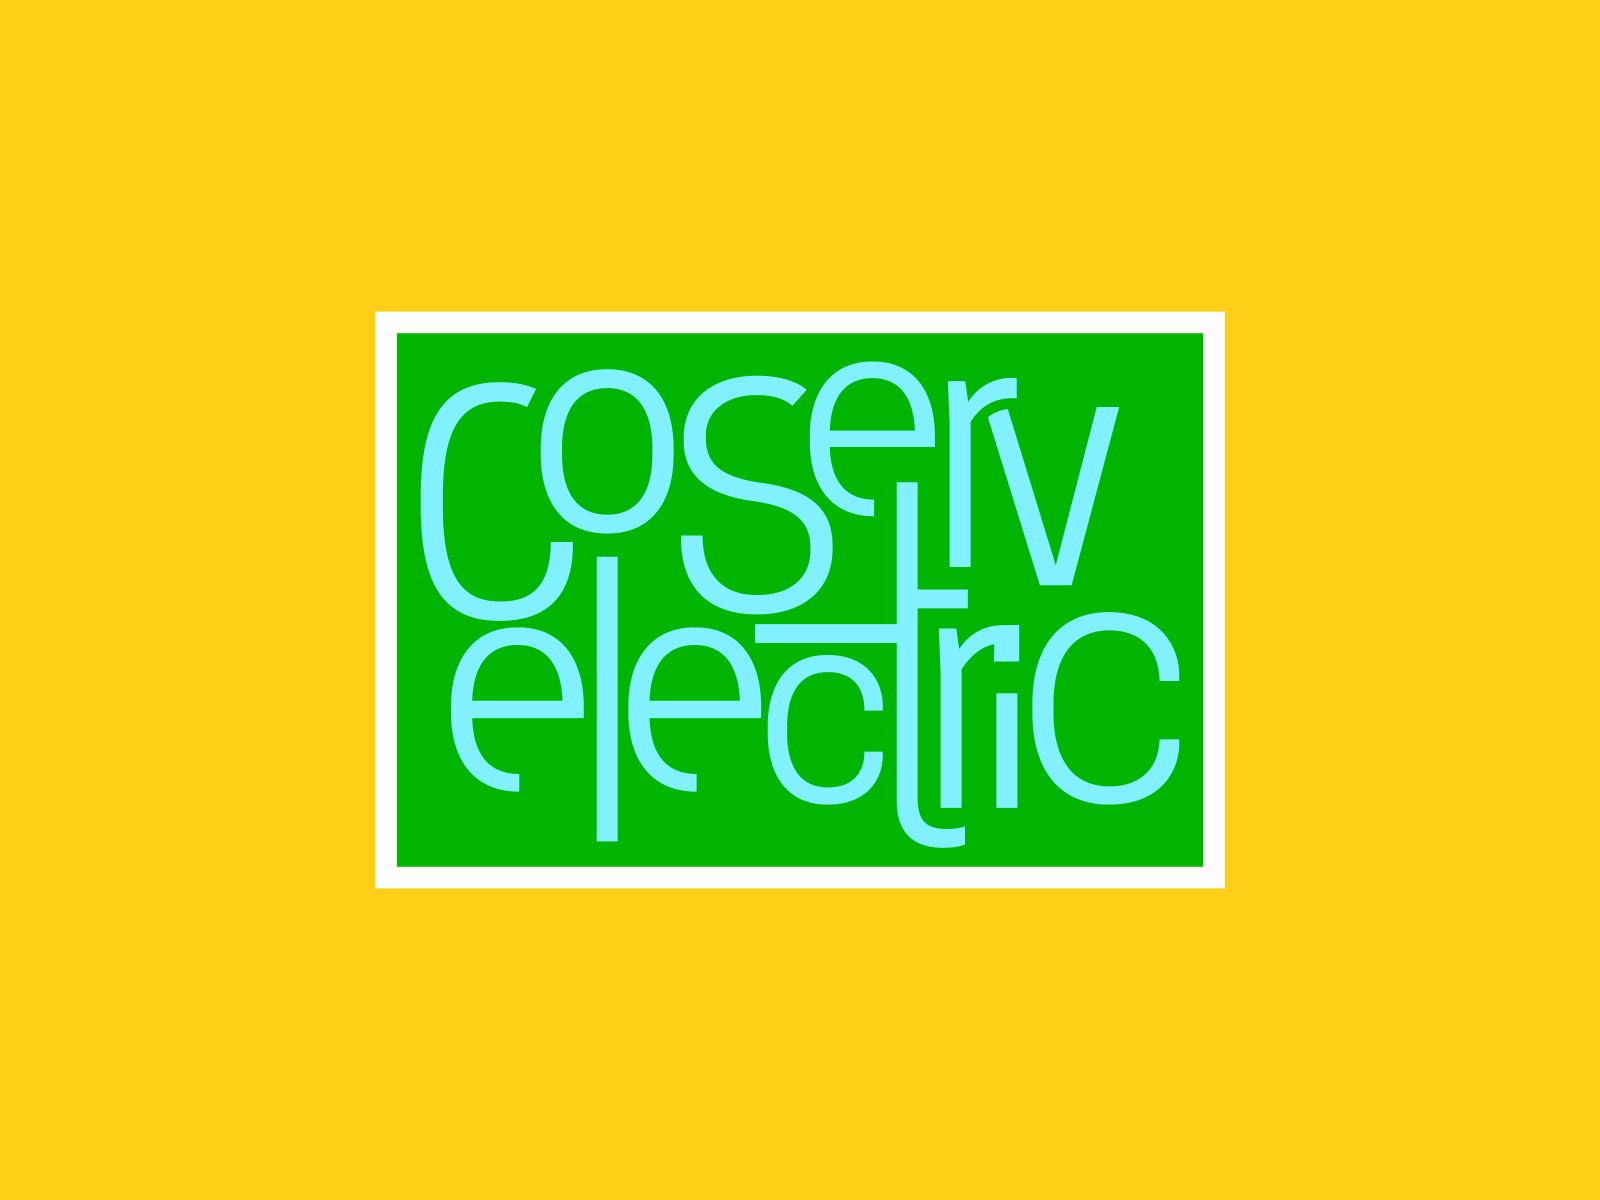 coserv-electric-by-peter-scrufari-on-dribbble